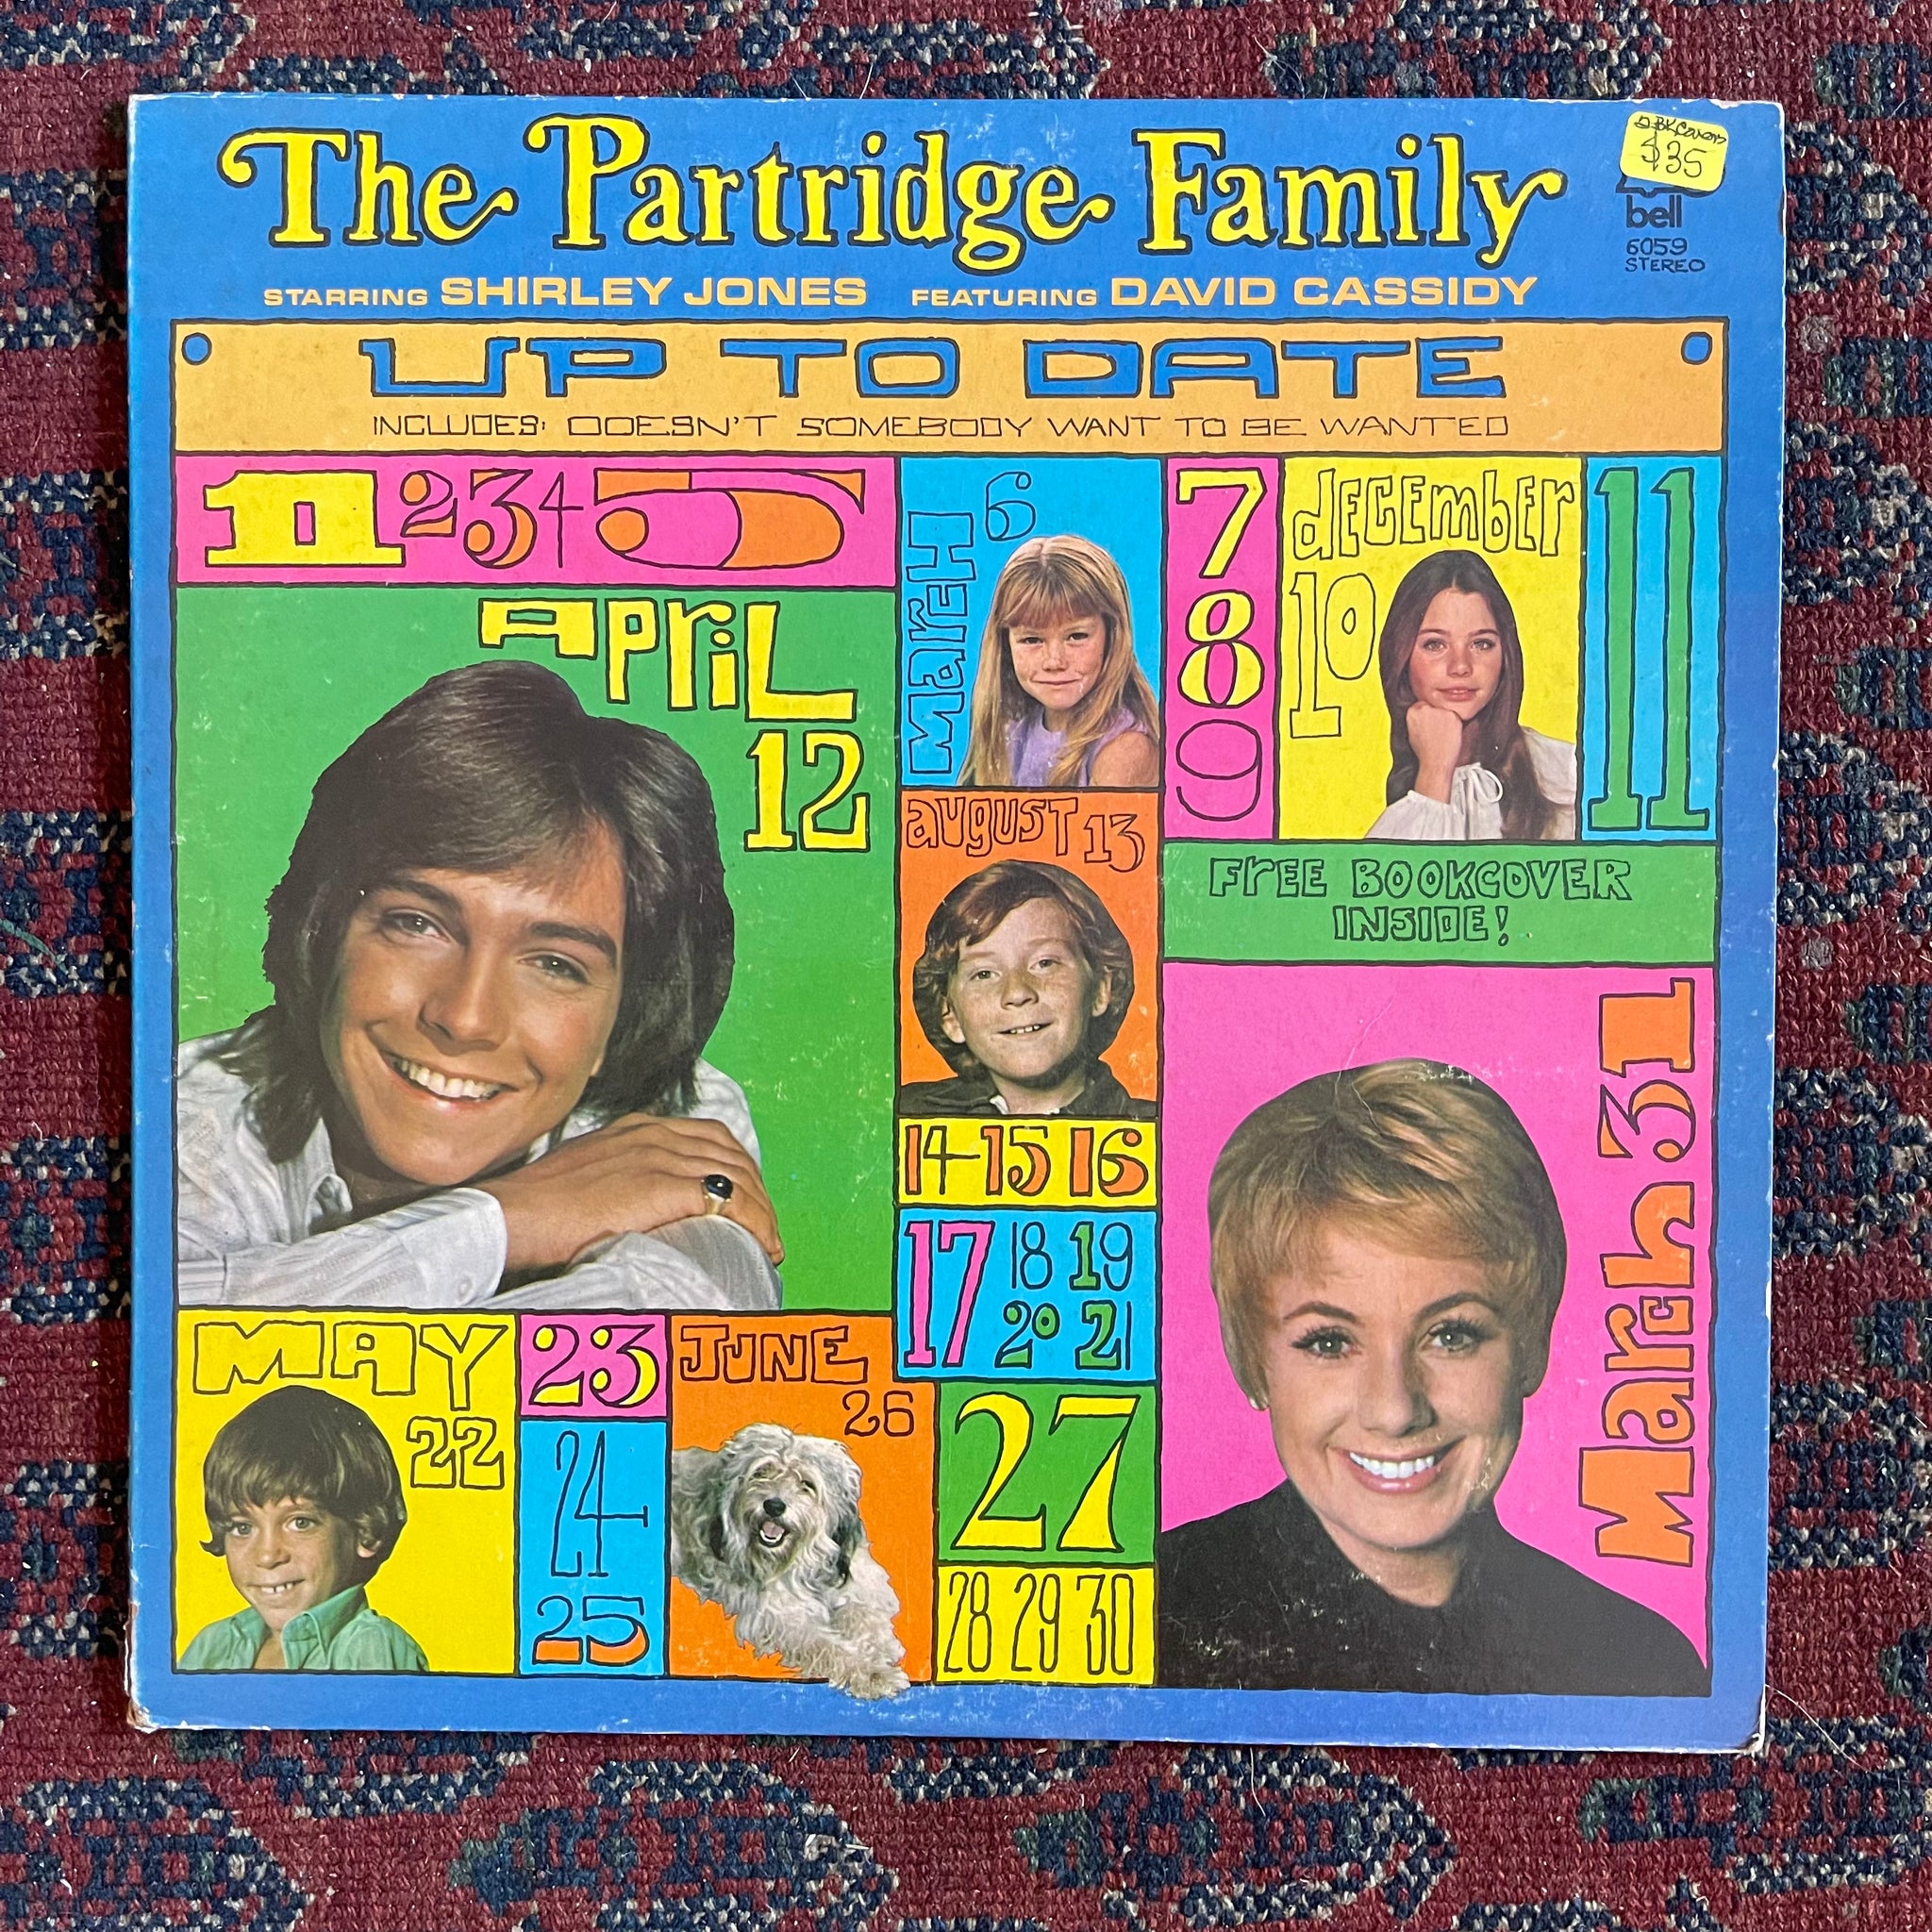 A Partridge Family Christmas Card by The Partridge Family (Album